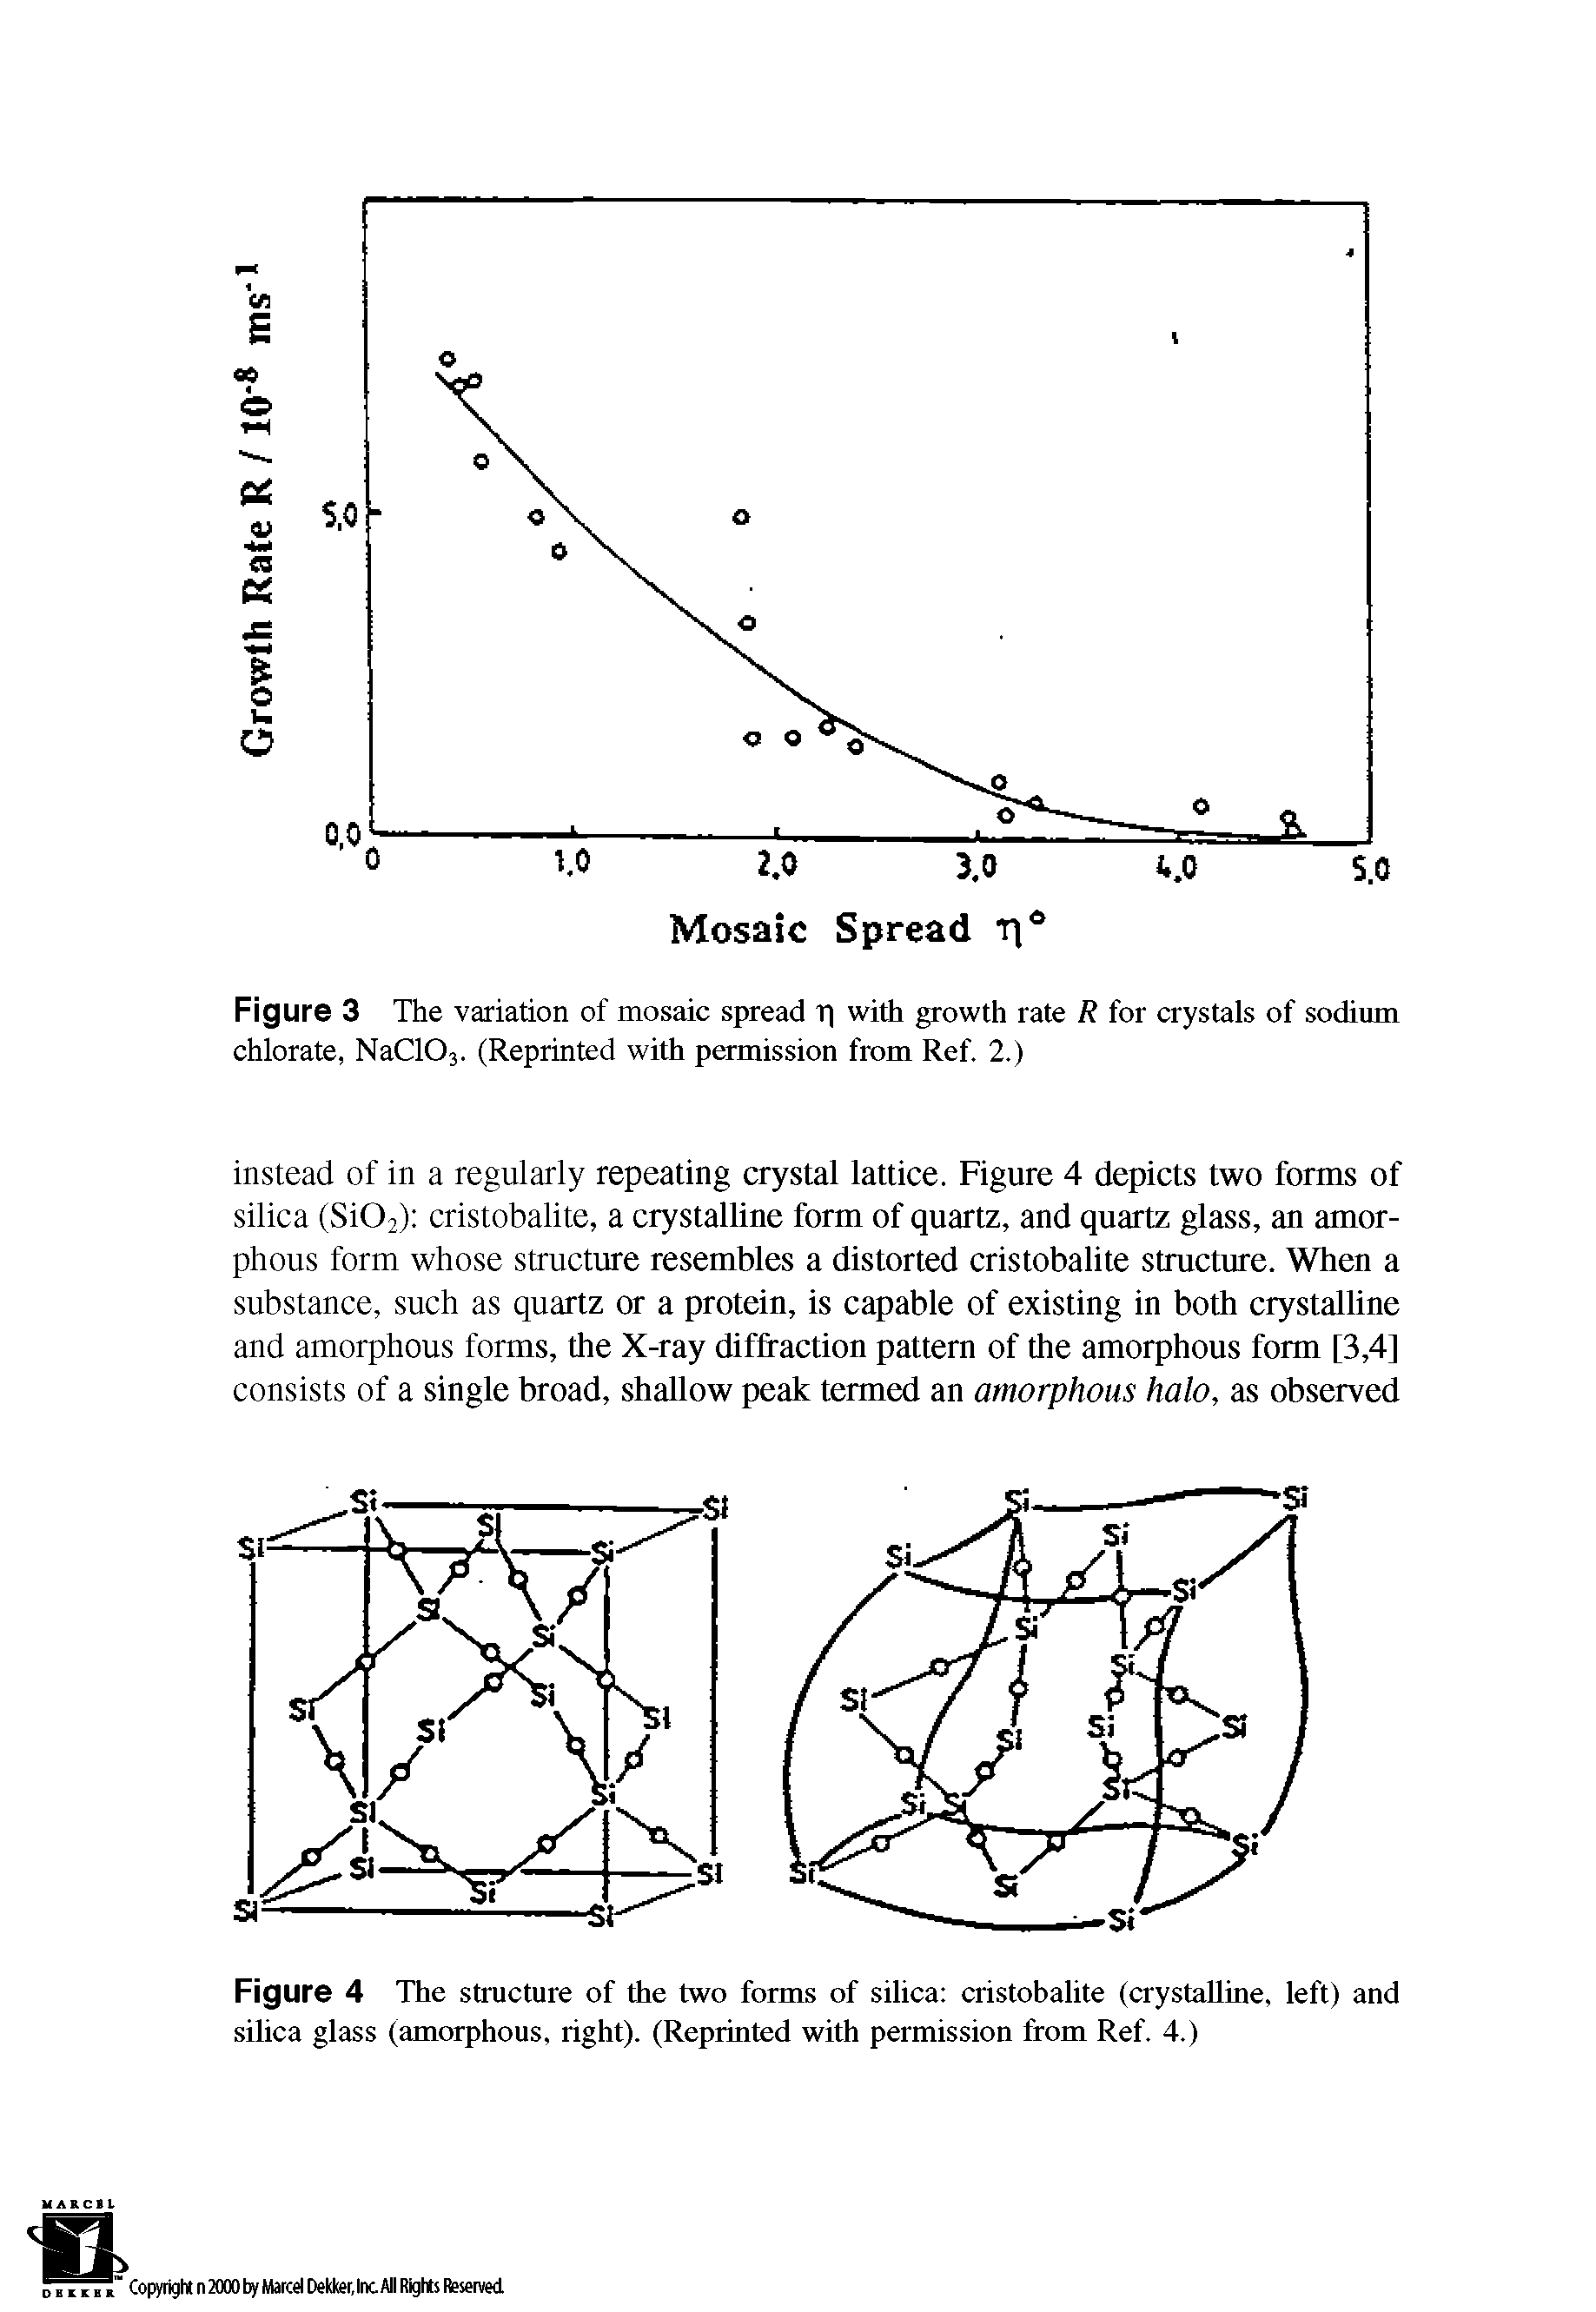 Figure 4 The structure of the two forms of silica cristobalite (crystalline, left) and silica glass (amorphous, right). (Reprinted with permission from Ref. 4.)...